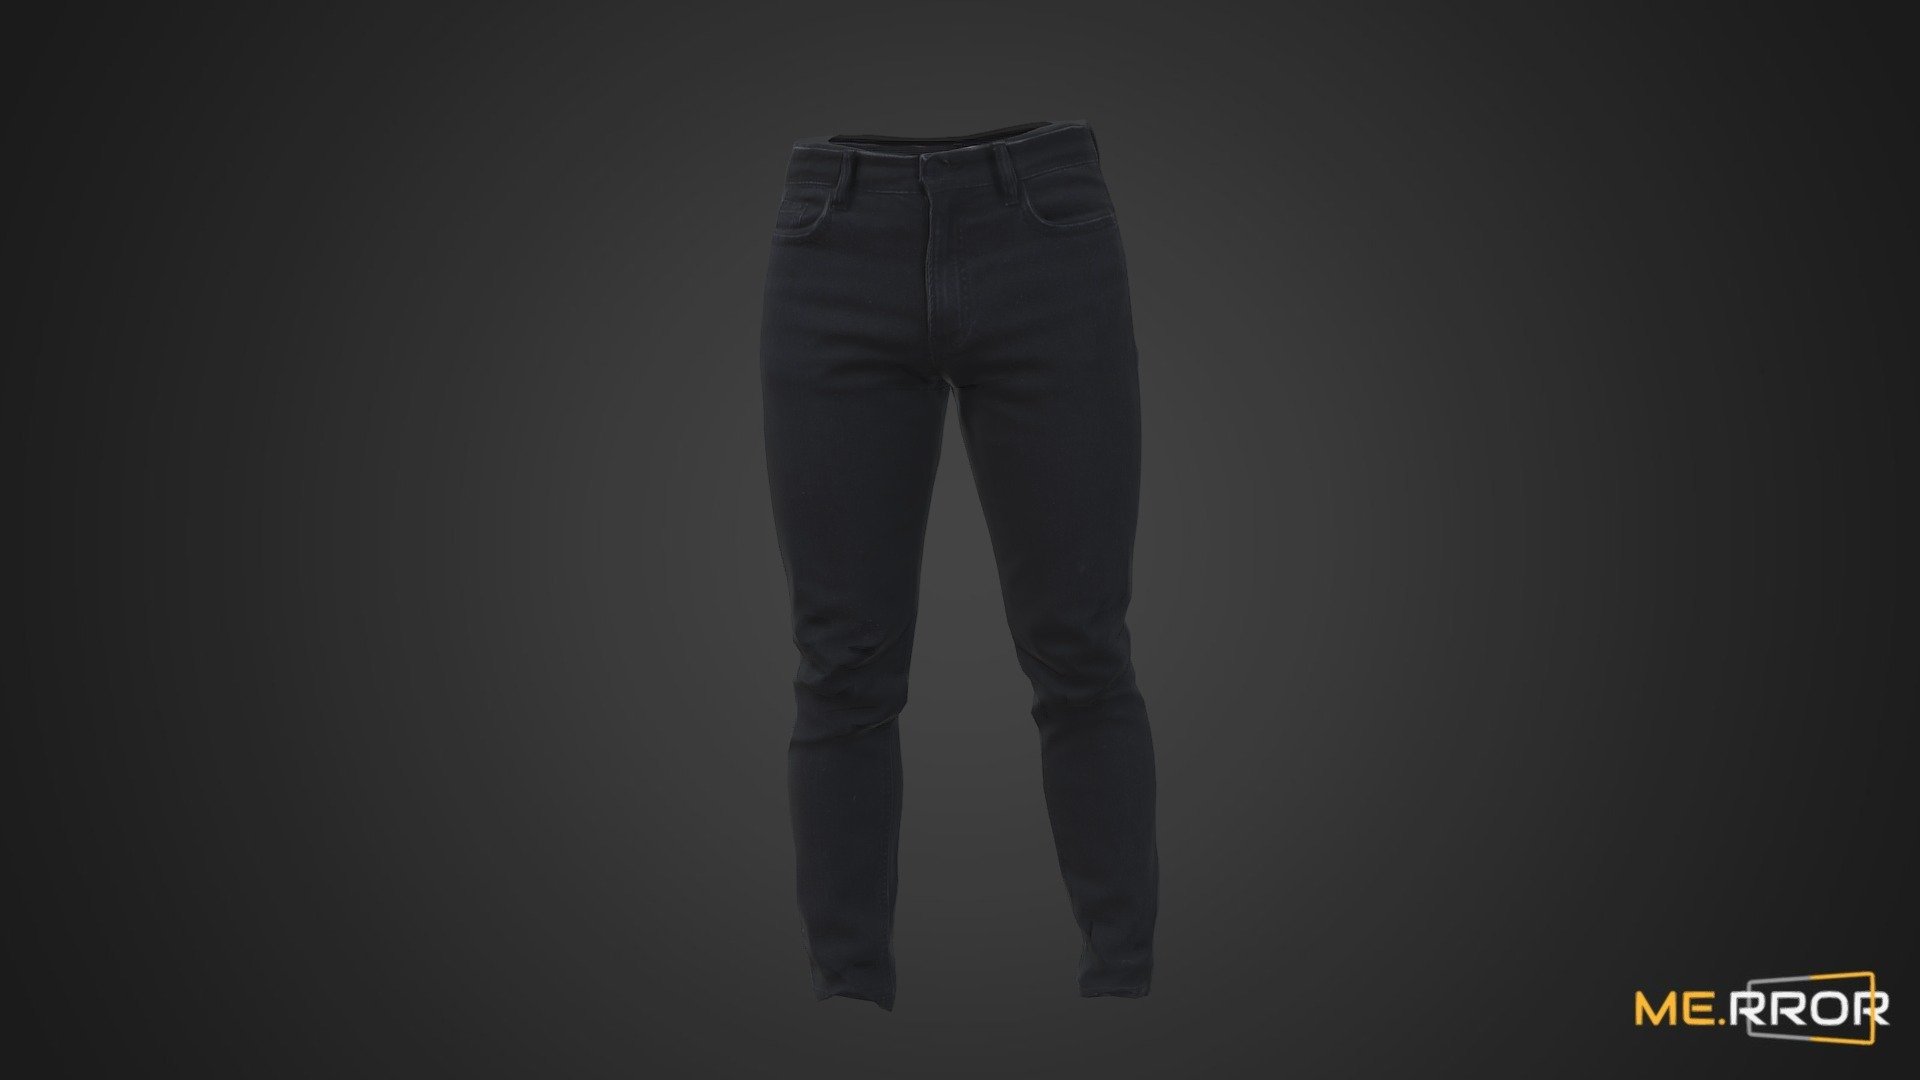 MERROR is a 3D Content PLATFORM which introduces various Asian assets to the 3D world

#3DScanning #Photogrametry #ME.RROR - [Game-Ready] Black Denim Jeans - Buy Royalty Free 3D model by ME.RROR (@merror) 3d model